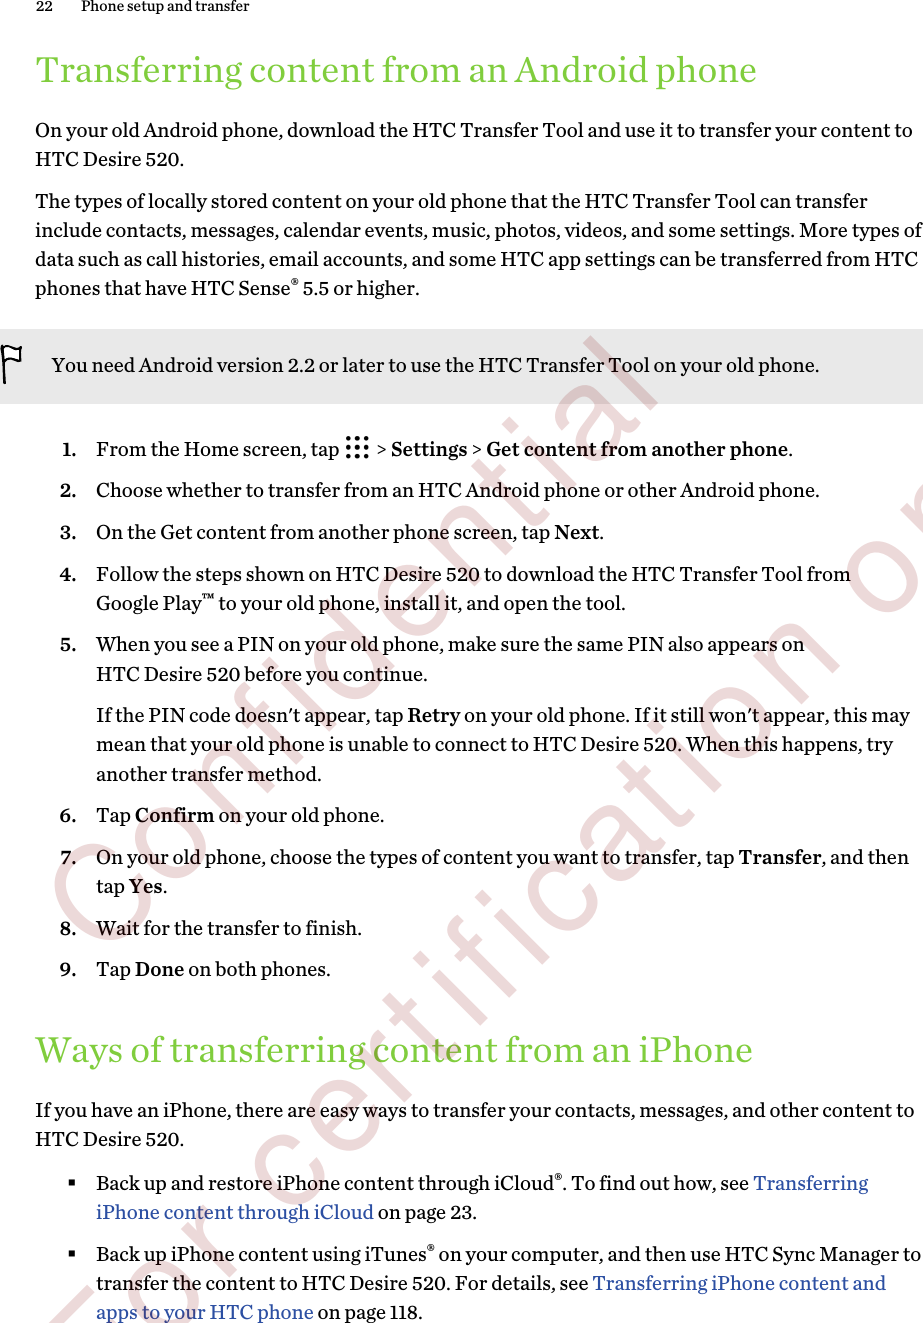 Transferring content from an Android phoneOn your old Android phone, download the HTC Transfer Tool and use it to transfer your content toHTC Desire 520.The types of locally stored content on your old phone that the HTC Transfer Tool can transferinclude contacts, messages, calendar events, music, photos, videos, and some settings. More types ofdata such as call histories, email accounts, and some HTC app settings can be transferred from HTCphones that have HTC Sense® 5.5 or higher.You need Android version 2.2 or later to use the HTC Transfer Tool on your old phone.1. From the Home screen, tap   &gt; Settings &gt; Get content from another phone.2. Choose whether to transfer from an HTC Android phone or other Android phone.3. On the Get content from another phone screen, tap Next.4. Follow the steps shown on HTC Desire 520 to download the HTC Transfer Tool fromGoogle Play™ to your old phone, install it, and open the tool.5. When you see a PIN on your old phone, make sure the same PIN also appears onHTC Desire 520 before you continue. If the PIN code doesn&apos;t appear, tap Retry on your old phone. If it still won&apos;t appear, this maymean that your old phone is unable to connect to HTC Desire 520. When this happens, tryanother transfer method.6. Tap Confirm on your old phone.7. On your old phone, choose the types of content you want to transfer, tap Transfer, and thentap Yes.8. Wait for the transfer to finish.9. Tap Done on both phones.Ways of transferring content from an iPhoneIf you have an iPhone, there are easy ways to transfer your contacts, messages, and other content toHTC Desire 520.§Back up and restore iPhone content through iCloud®. To find out how, see TransferringiPhone content through iCloud on page 23.§Back up iPhone content using iTunes® on your computer, and then use HTC Sync Manager totransfer the content to HTC Desire 520. For details, see Transferring iPhone content andapps to your HTC phone on page 118.22 Phone setup and transfer        Confidential  For certification only